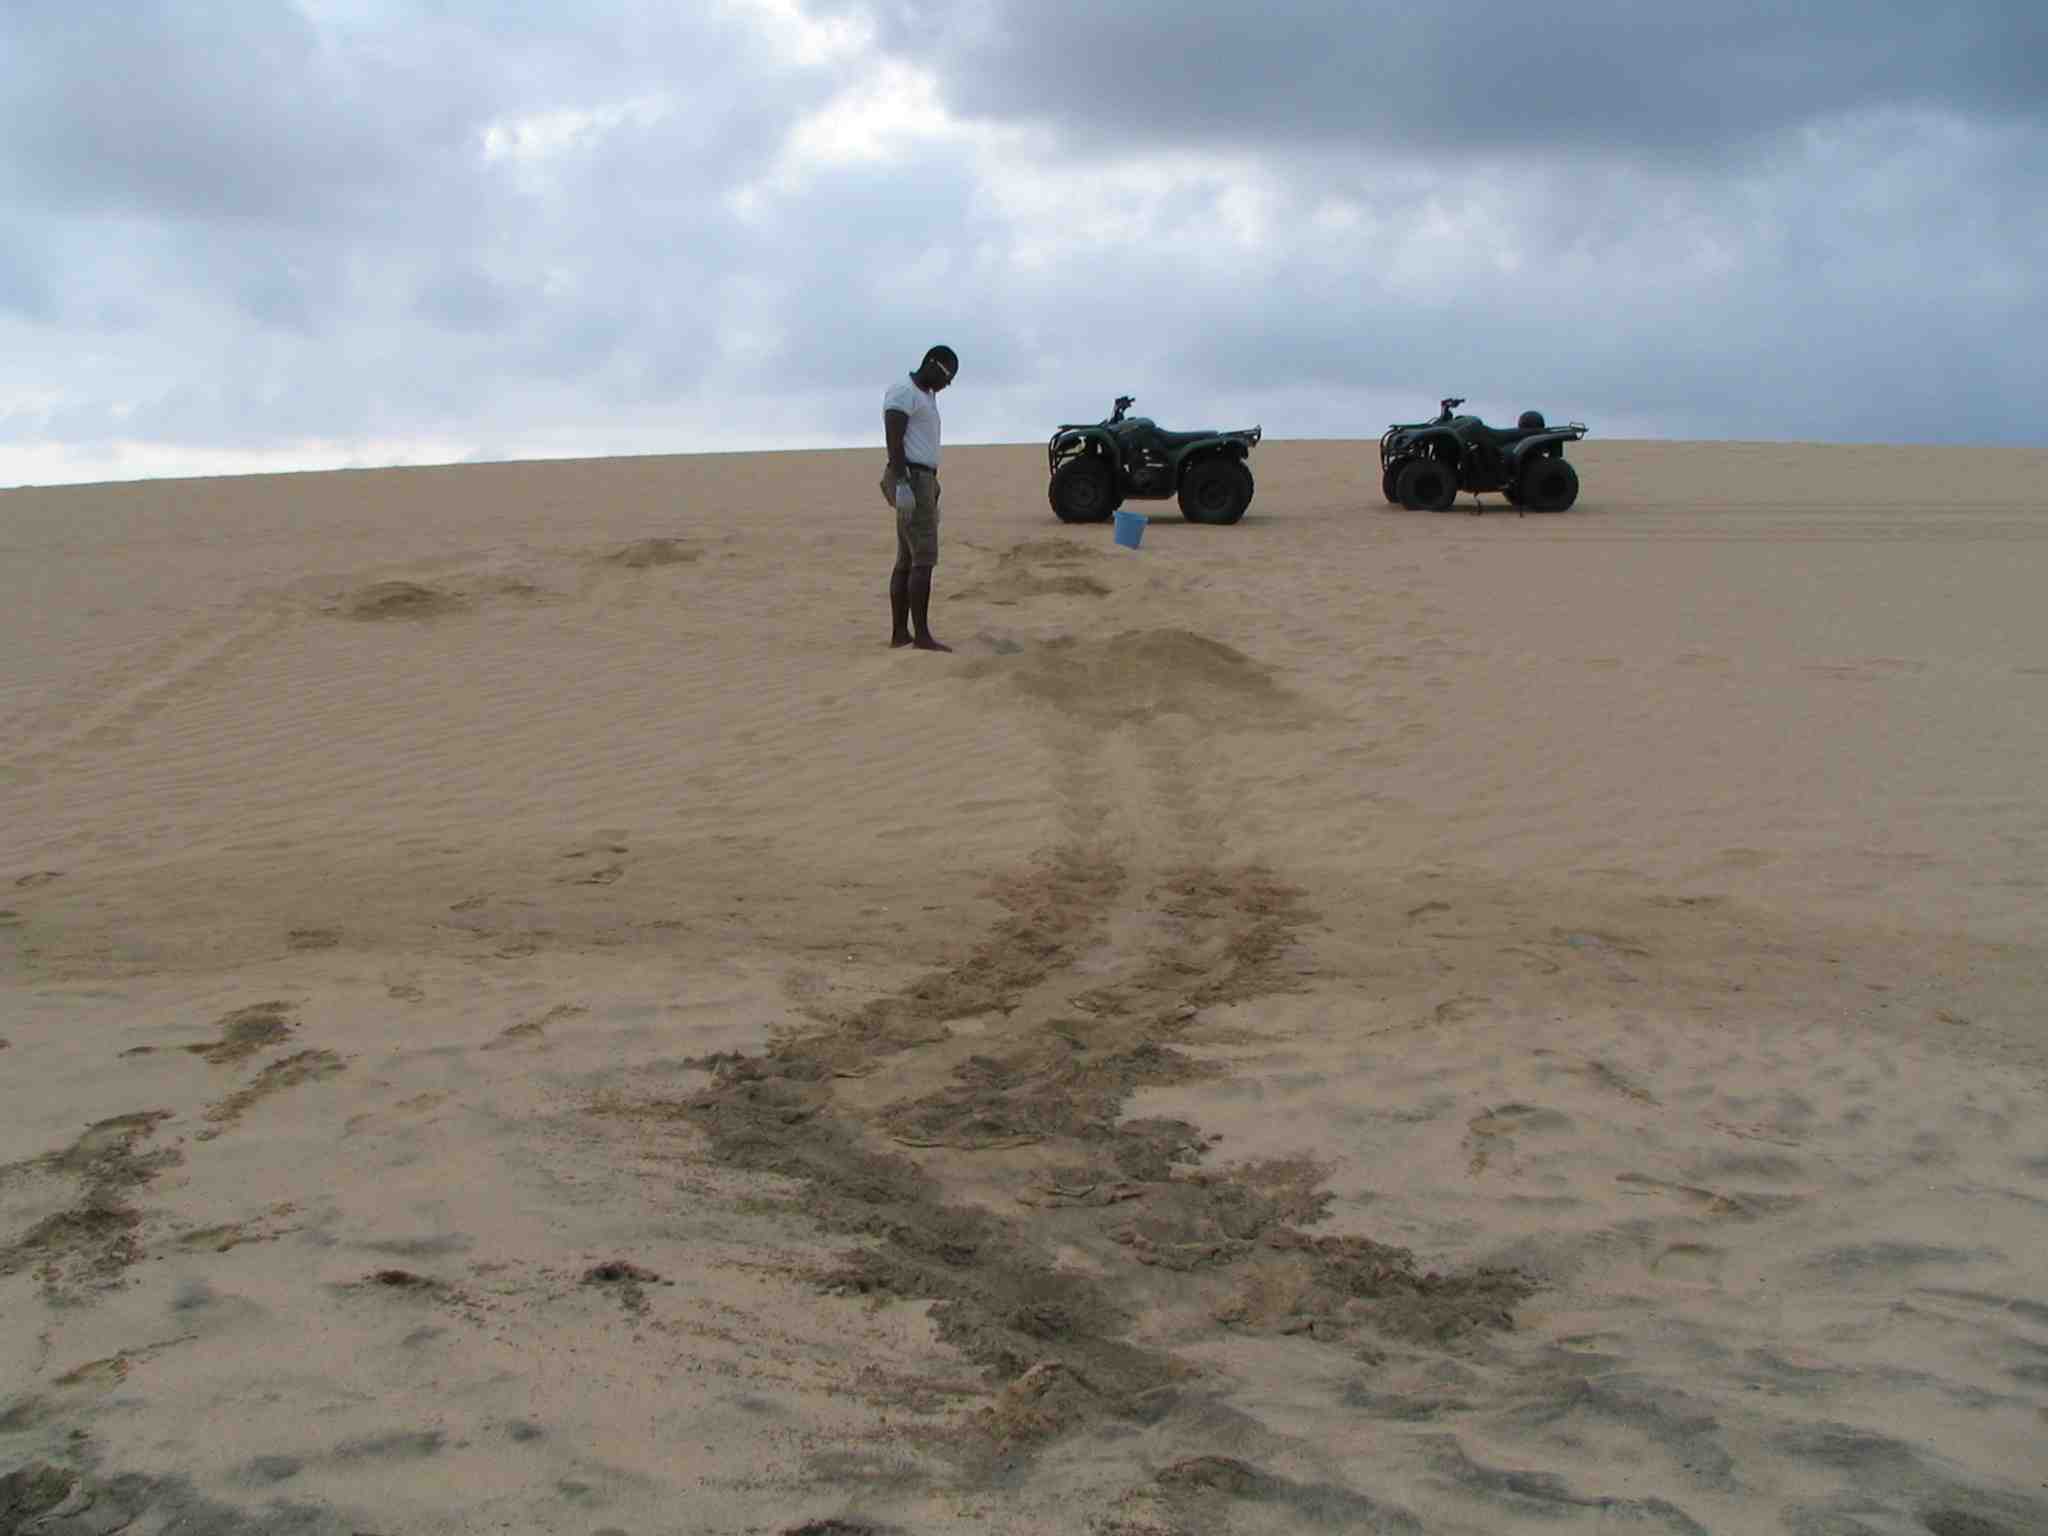 SeaTurtle protection needed at Cabo Verde